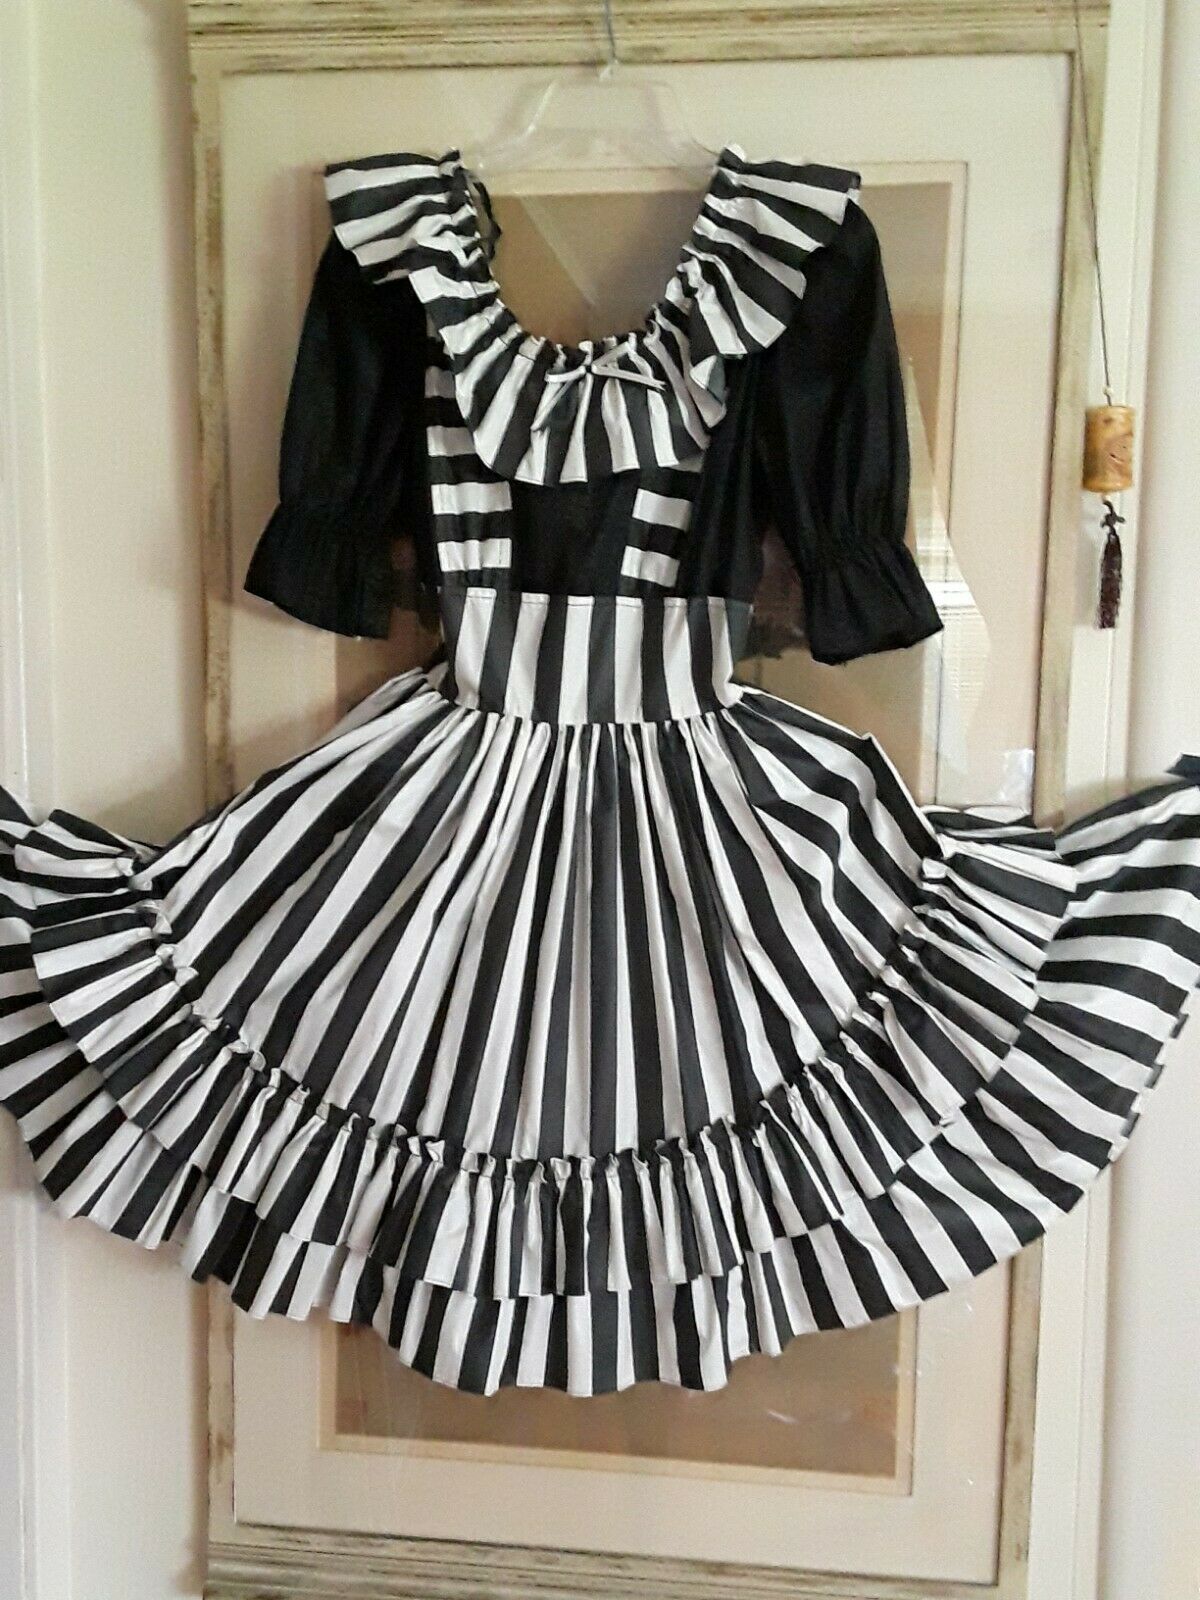 Square Dancing Dress By -call It Fancy' Size 12, Euc Black And White Stripes